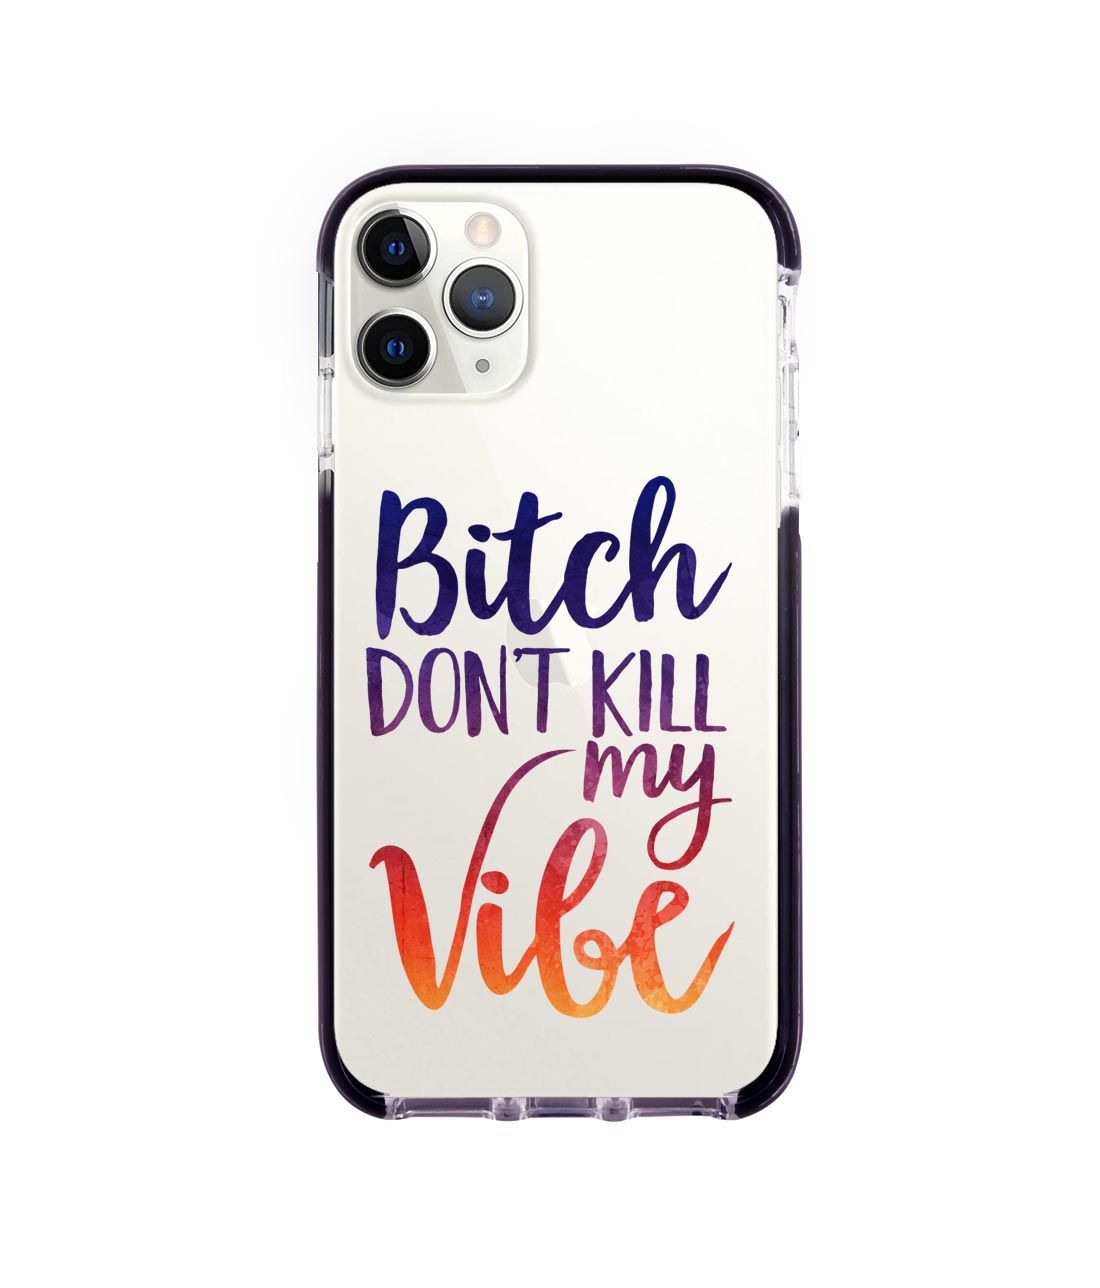 Dont kill my Vibe - Extreme Phone Case for iPhone 11 Pro